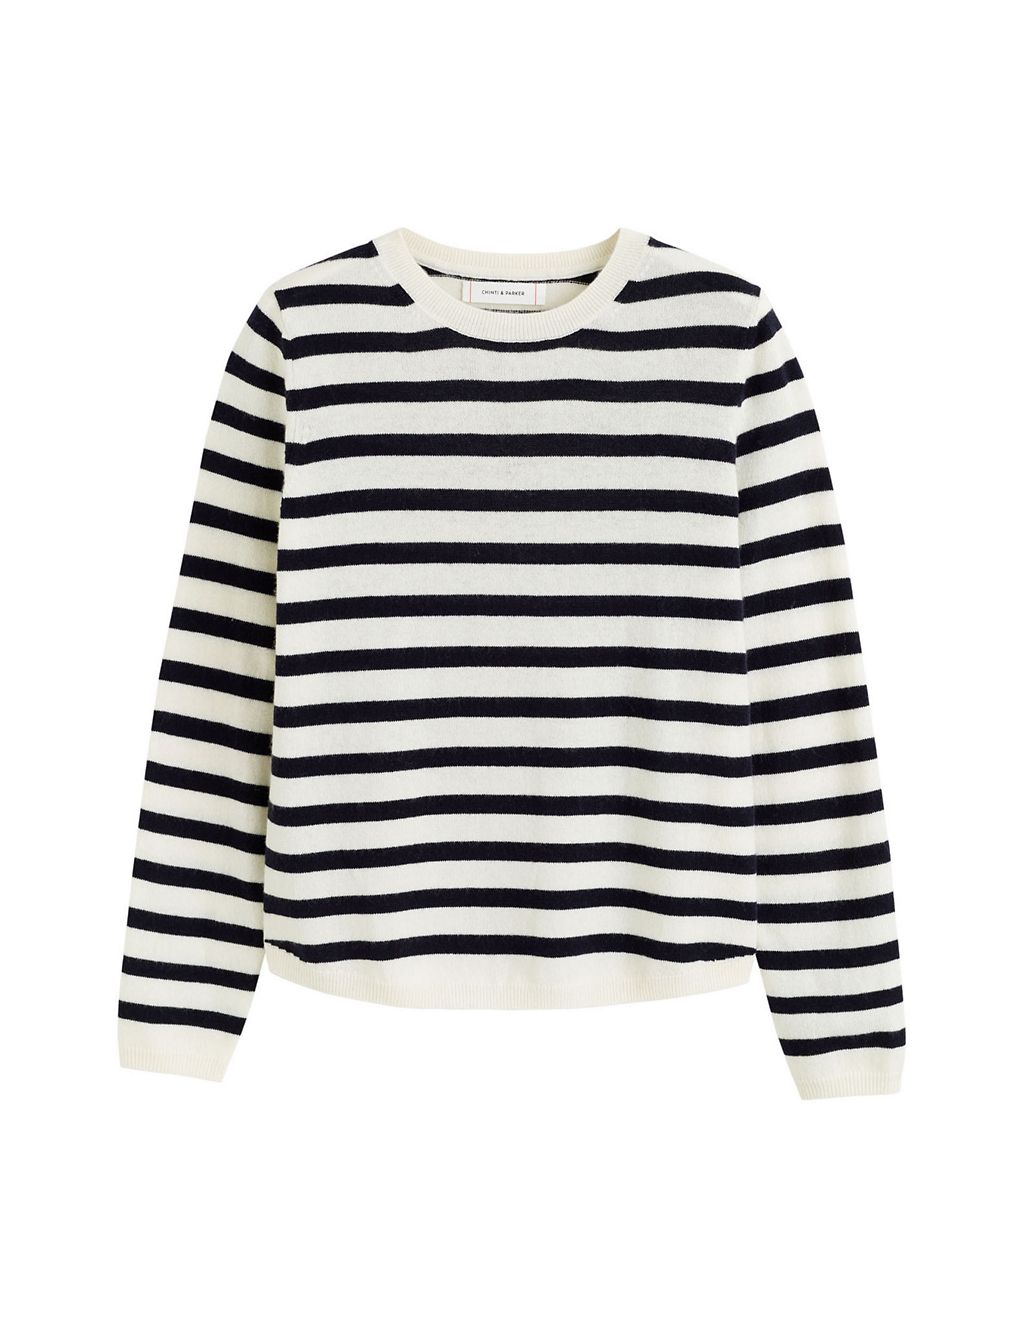 Wool Rich Striped Sweatshirt with Cashmere 1 of 4